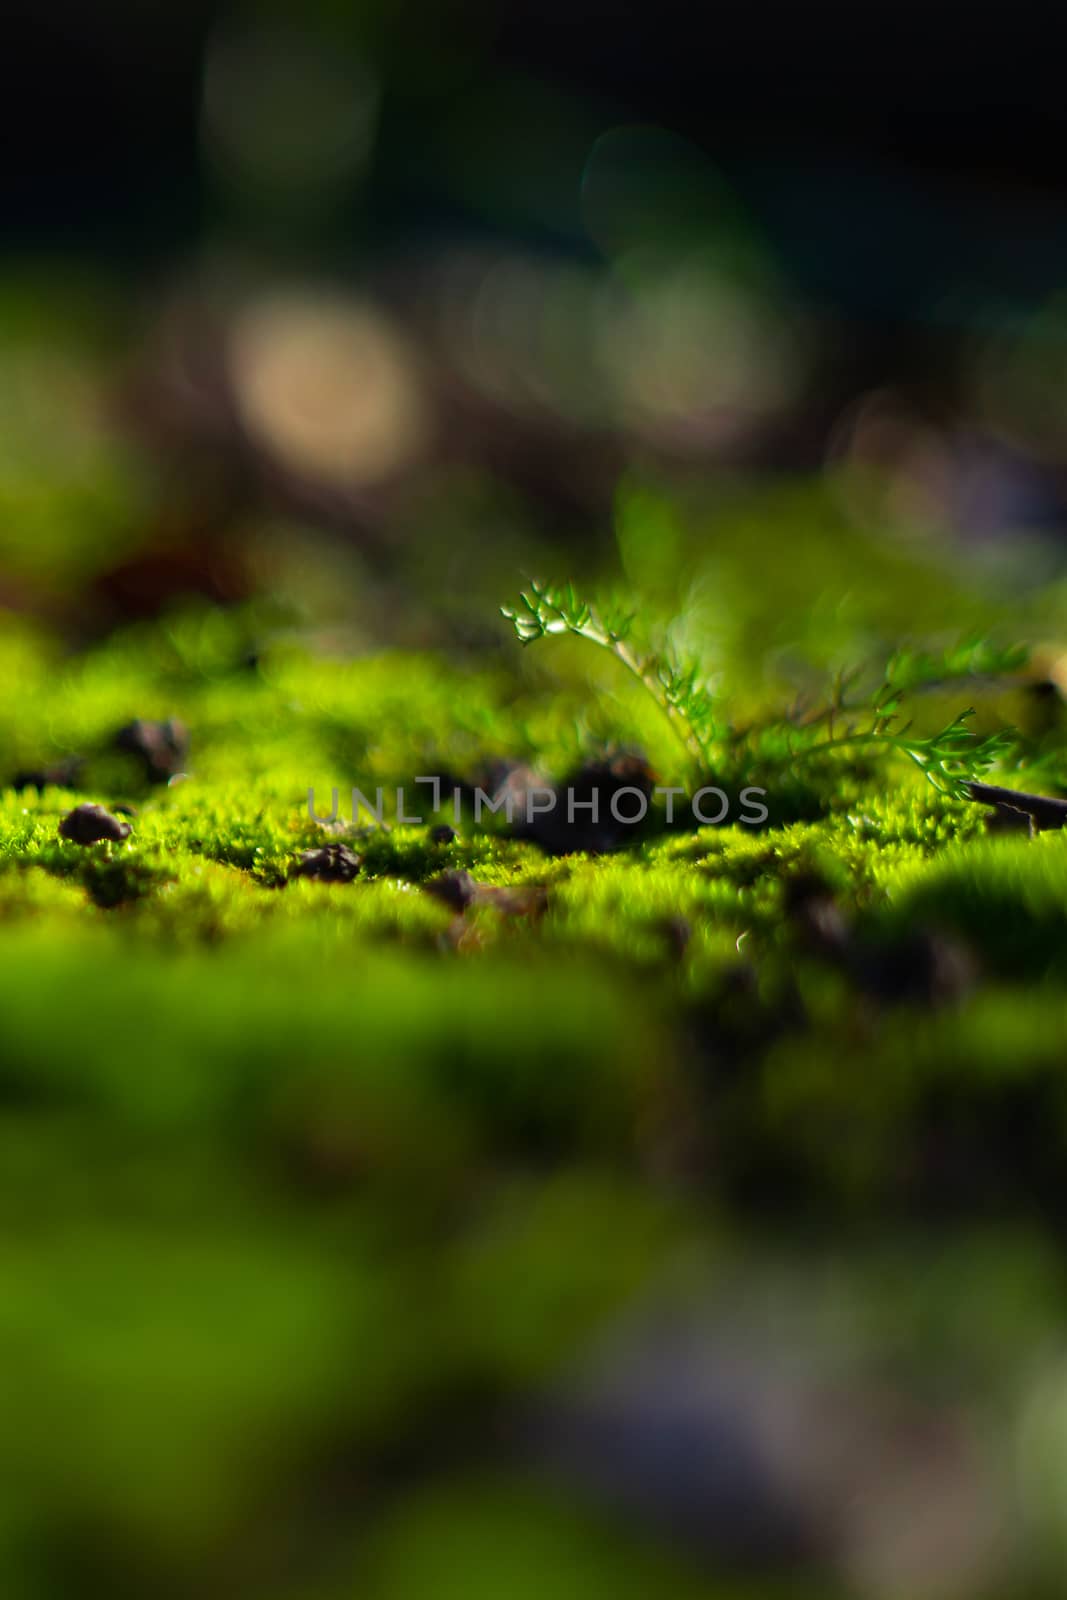 Hue green moss on black ground. Wet ground and soft moss. by alexsdriver